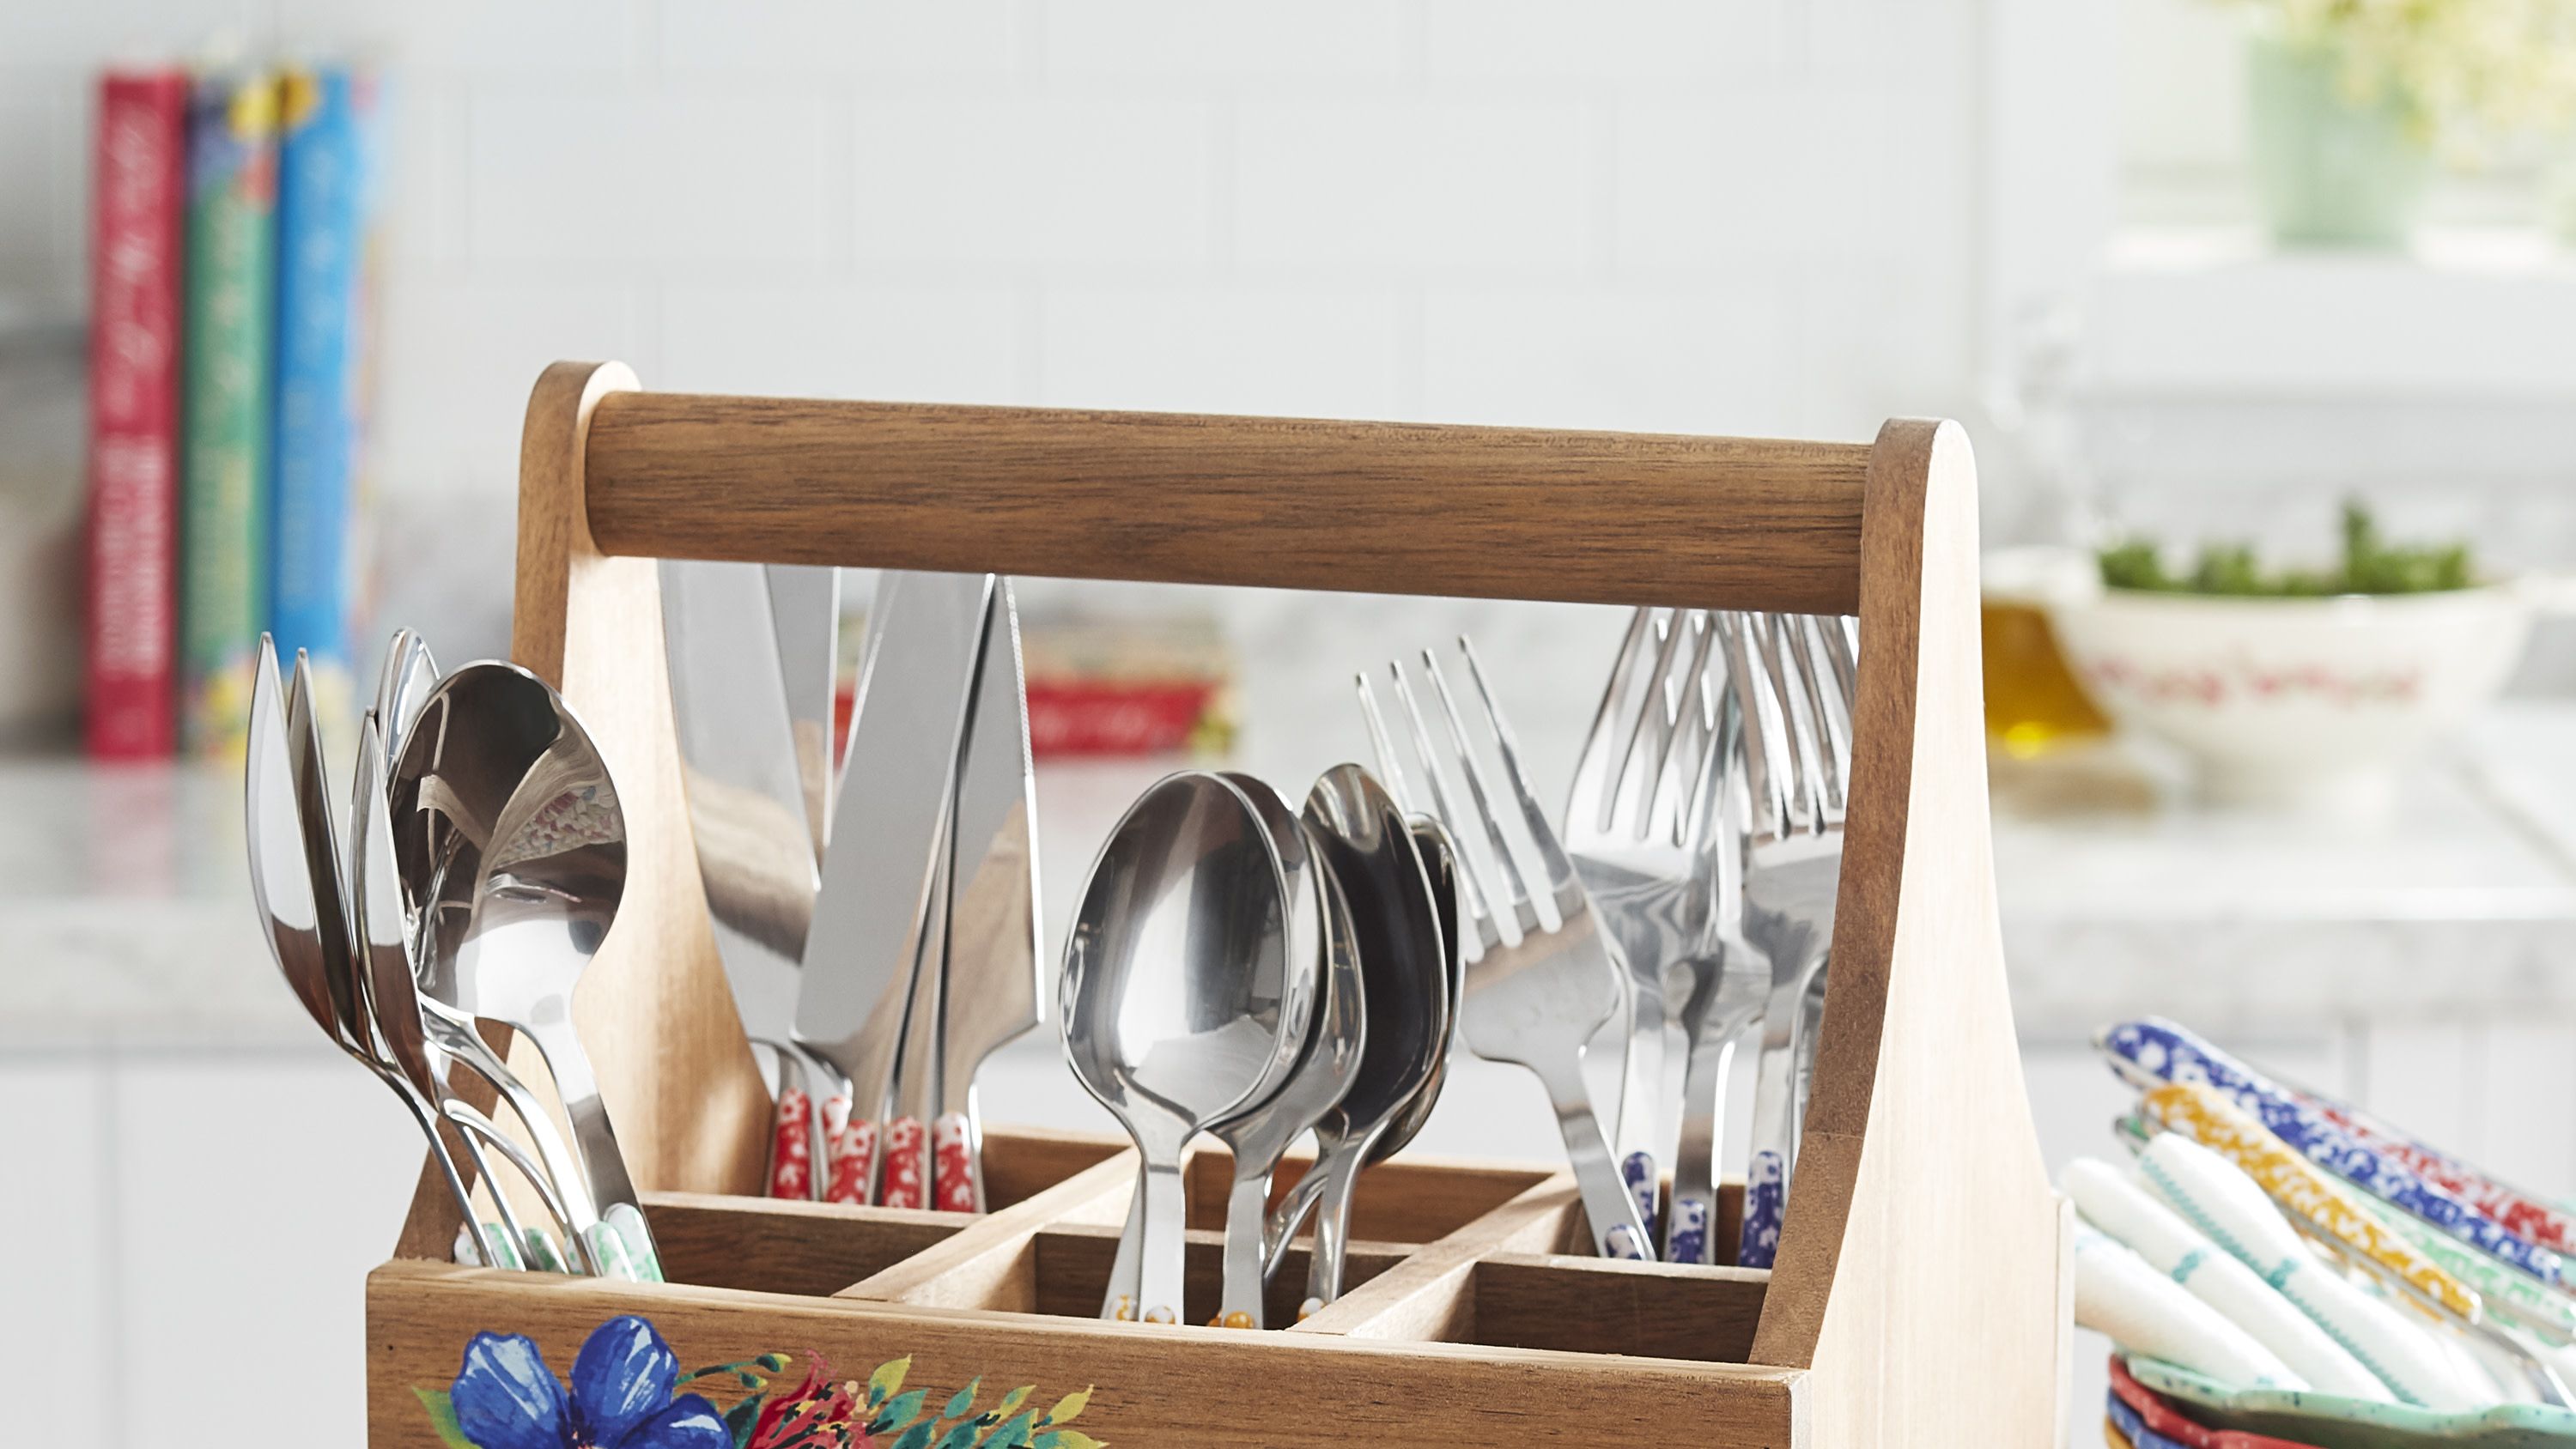 https://hips.hearstapps.com/hmg-prod/images/the-pioneer-woman-flatware-caddy-1631721499.jpeg?crop=1xw:0.5625xh;center,top